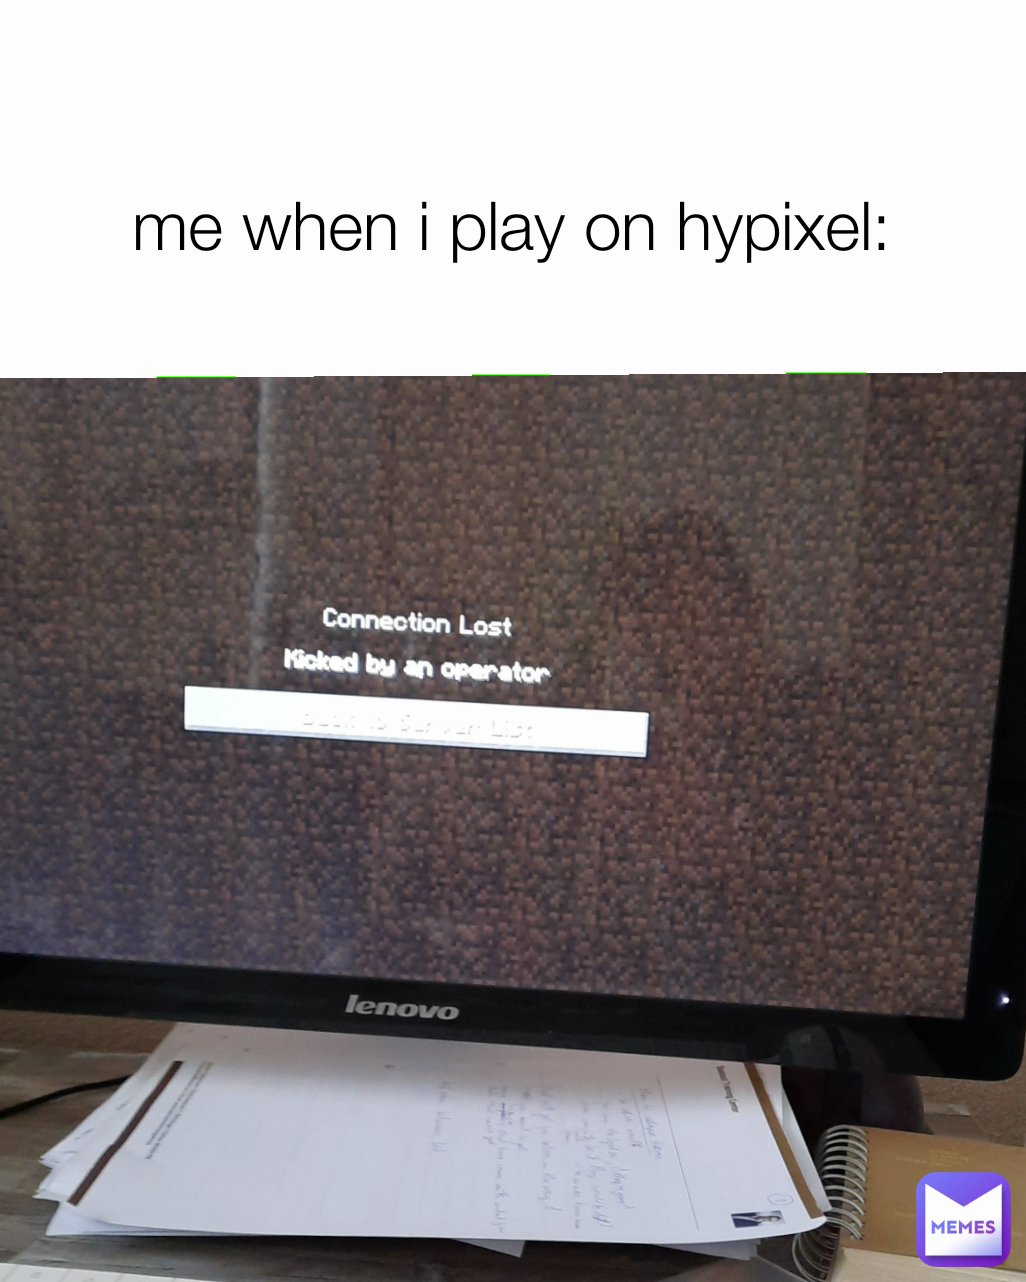 me when i play on hypixel: